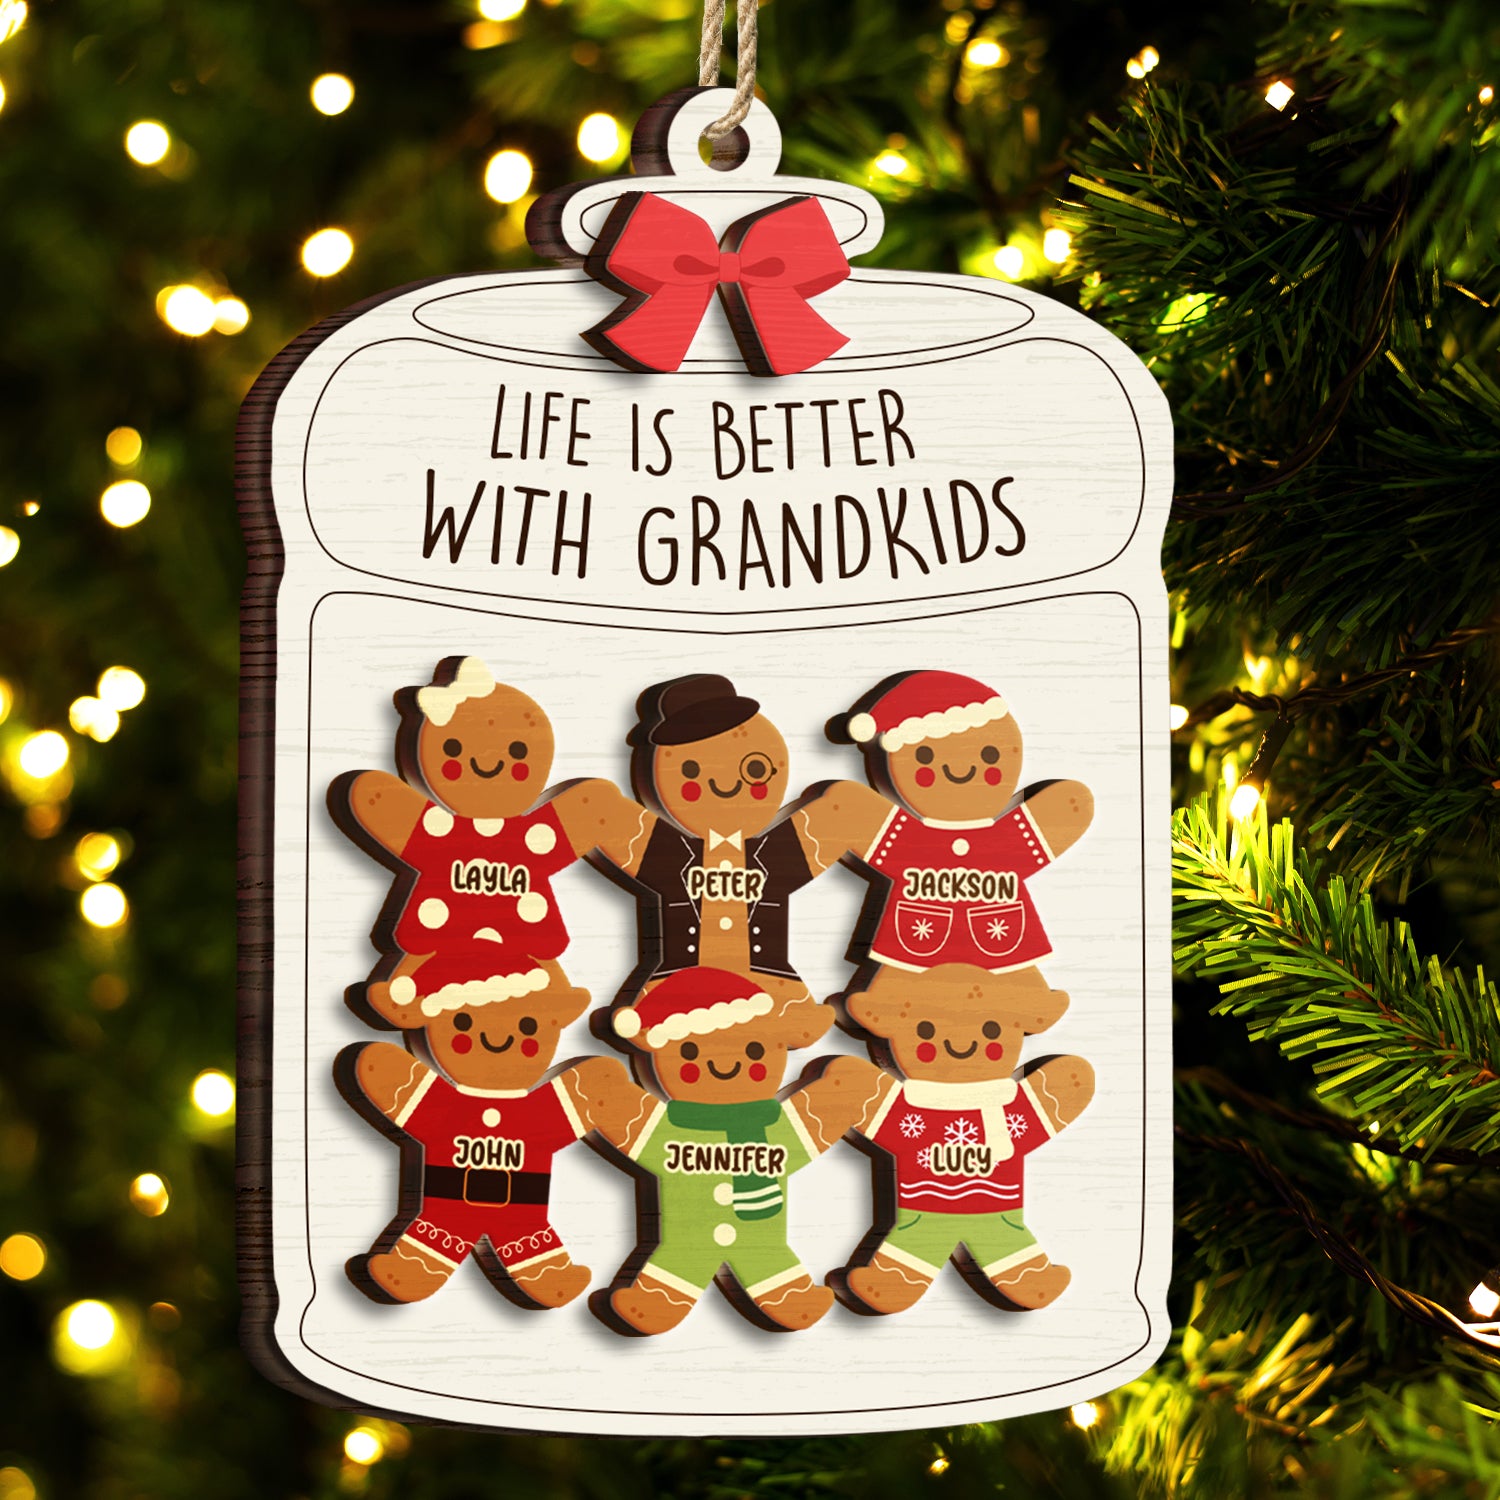 Gingerbread Life Is Better With Grandkids - Christmas, Gift For Grandparent - Personalized 2-Layered Wooden Ornament